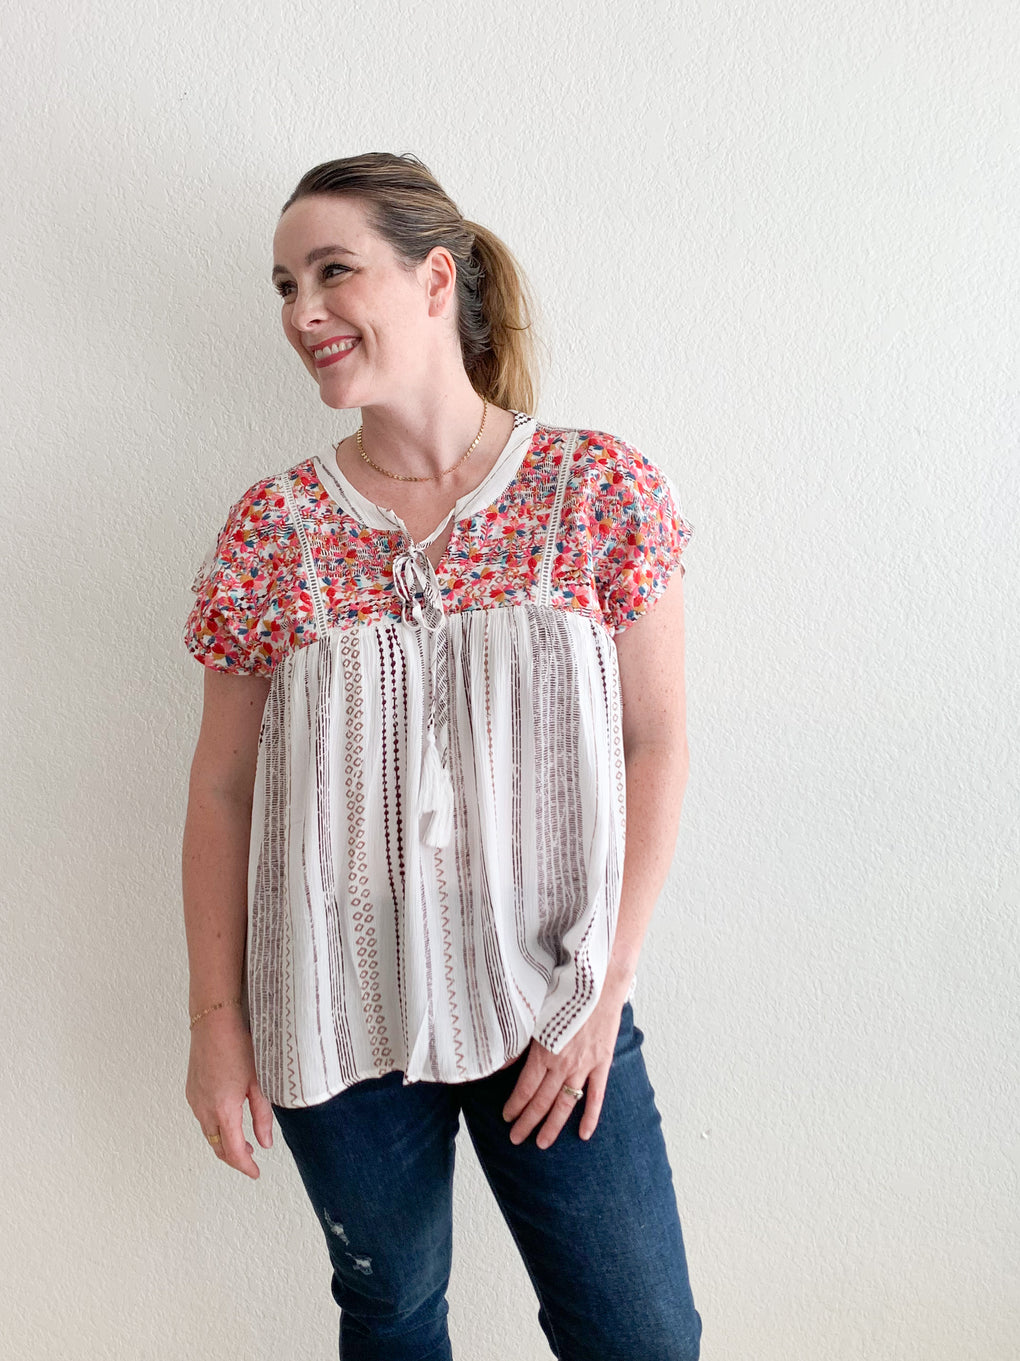 woman wearing flowy top with embroidery